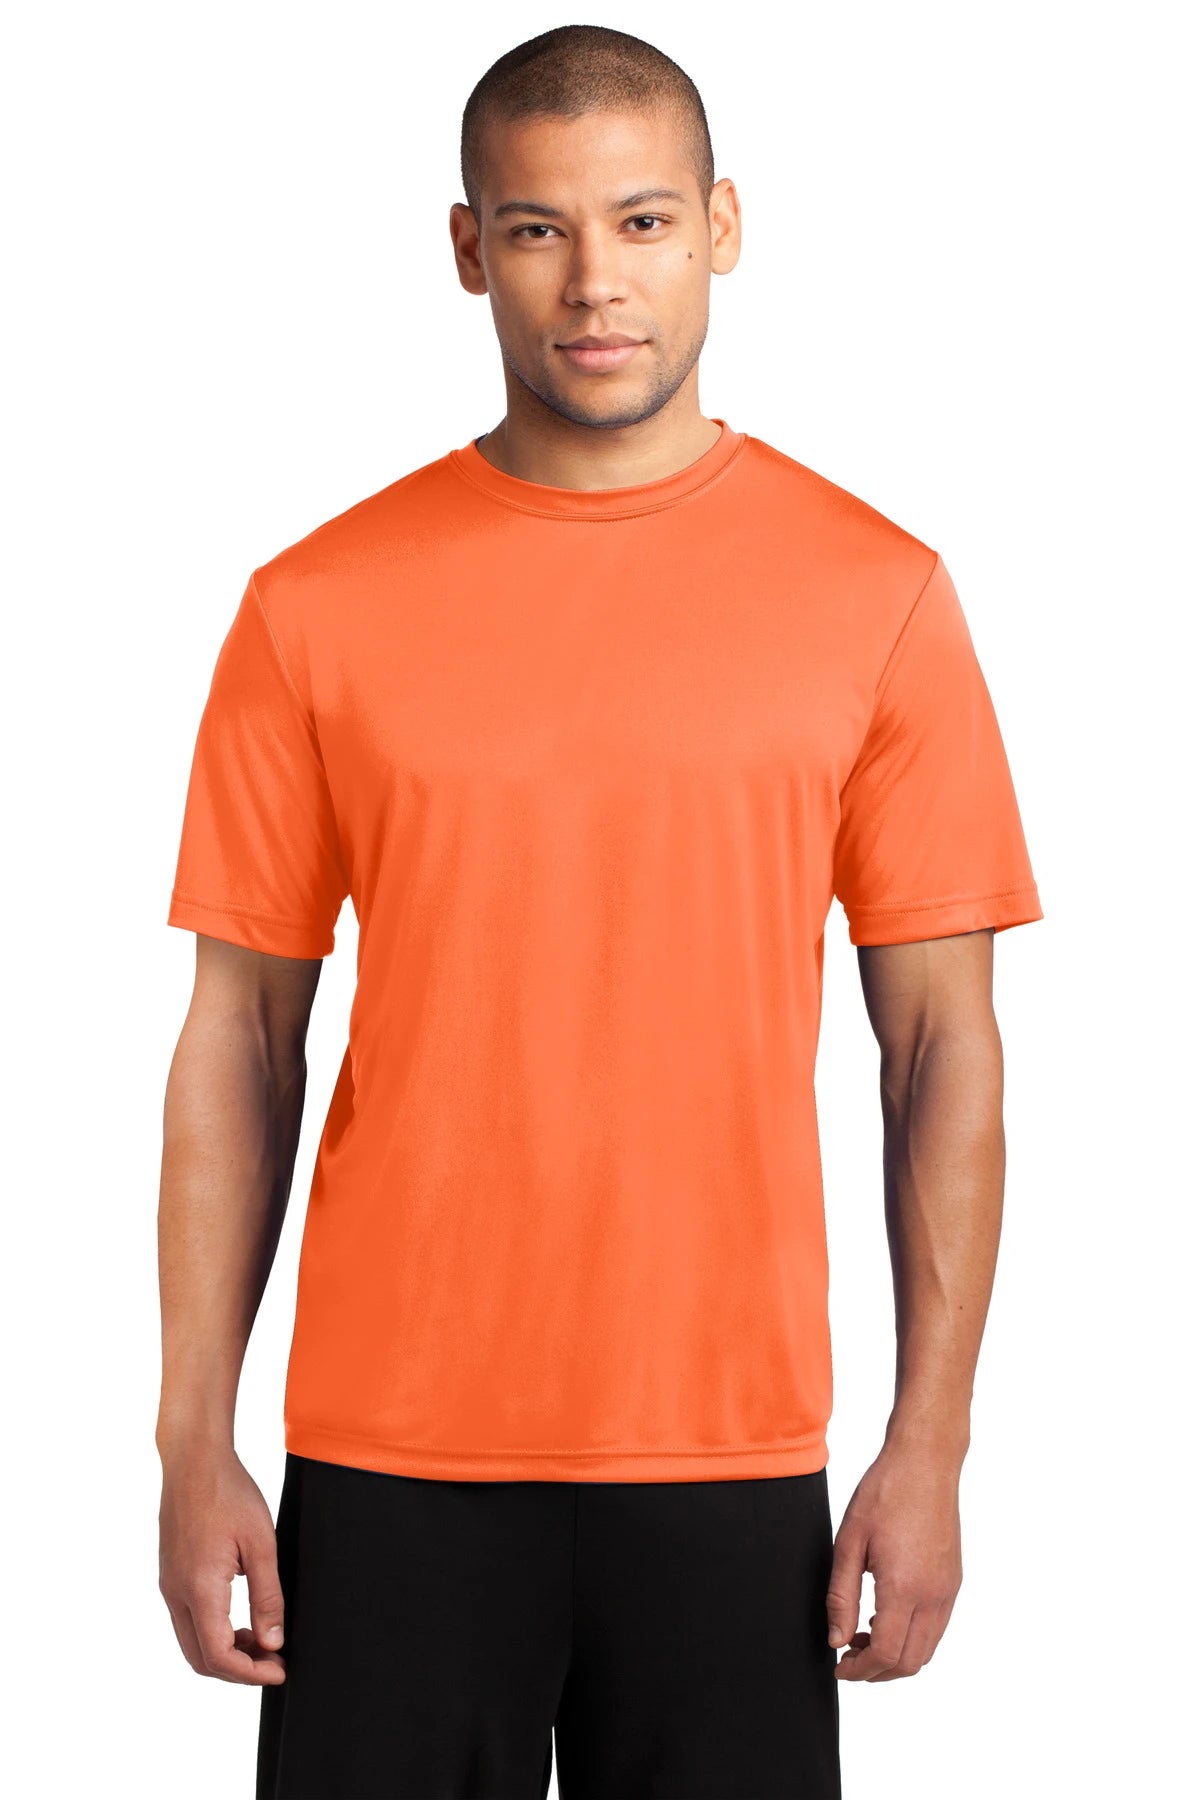 Style Wear 100% Polyester-Dri Fit T-shirts Short Sleeves